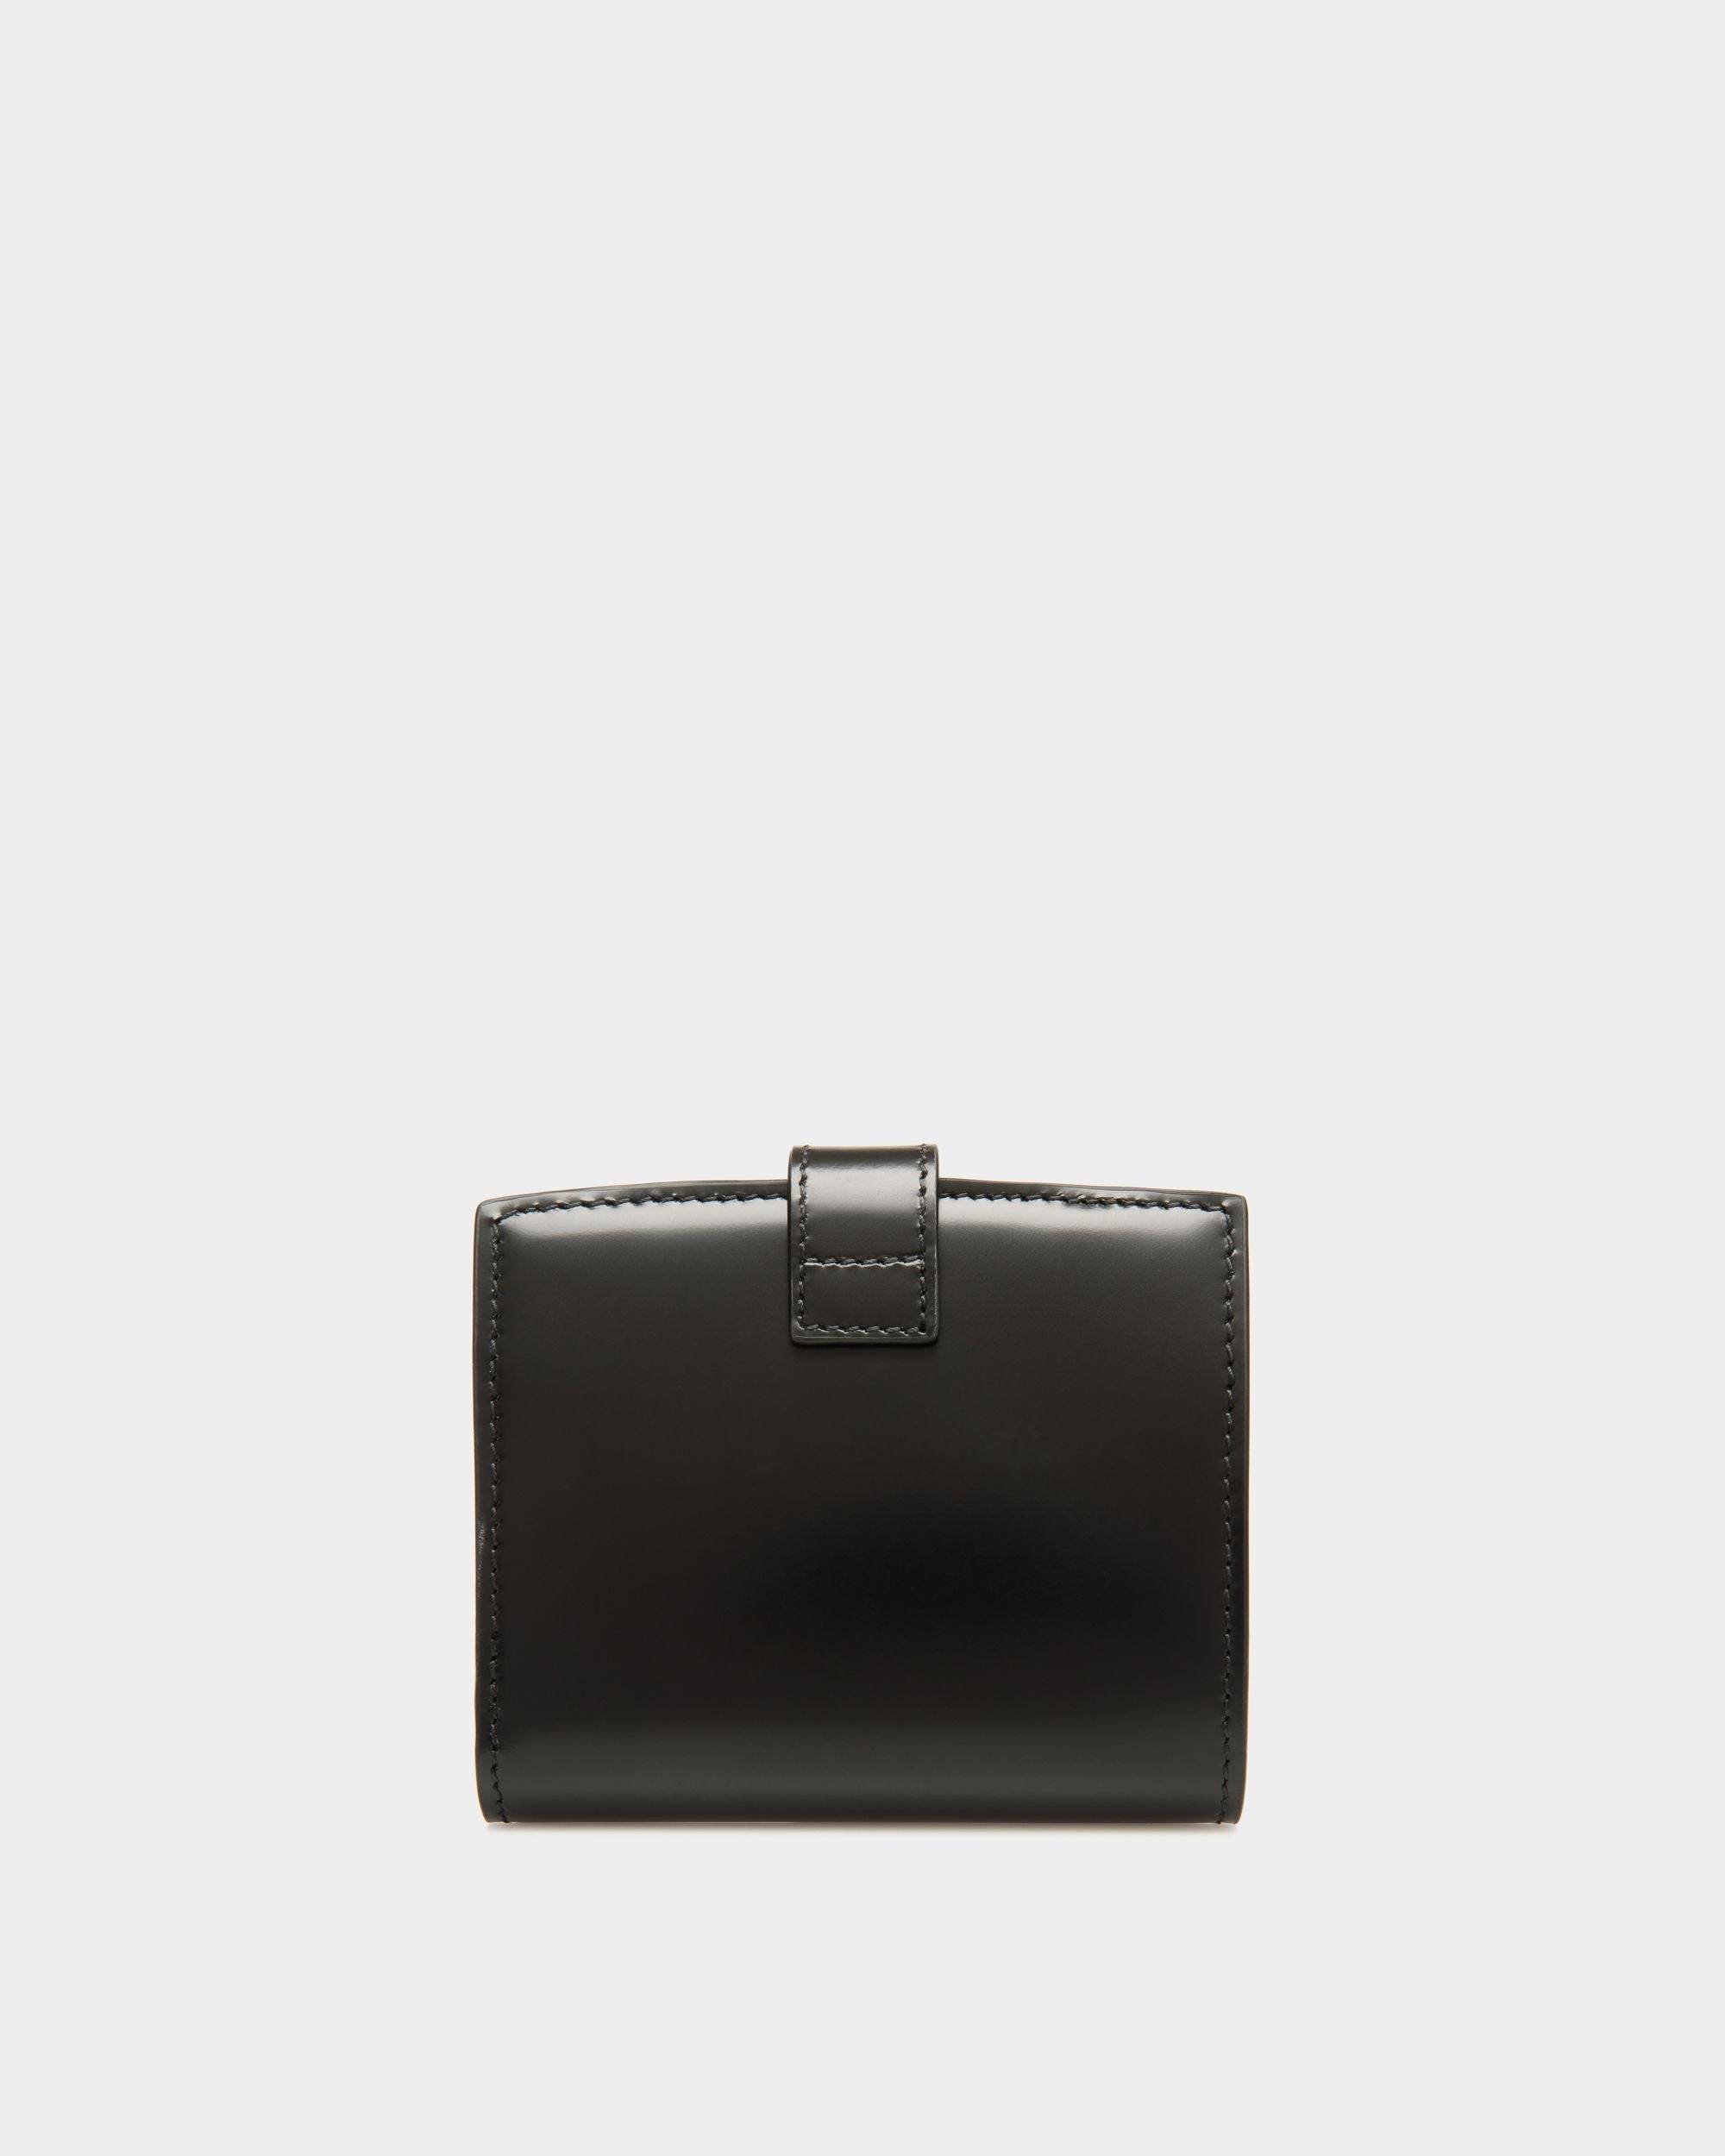 Ollam Wallet in Black Brushed Leather - Women's - Bally - 02